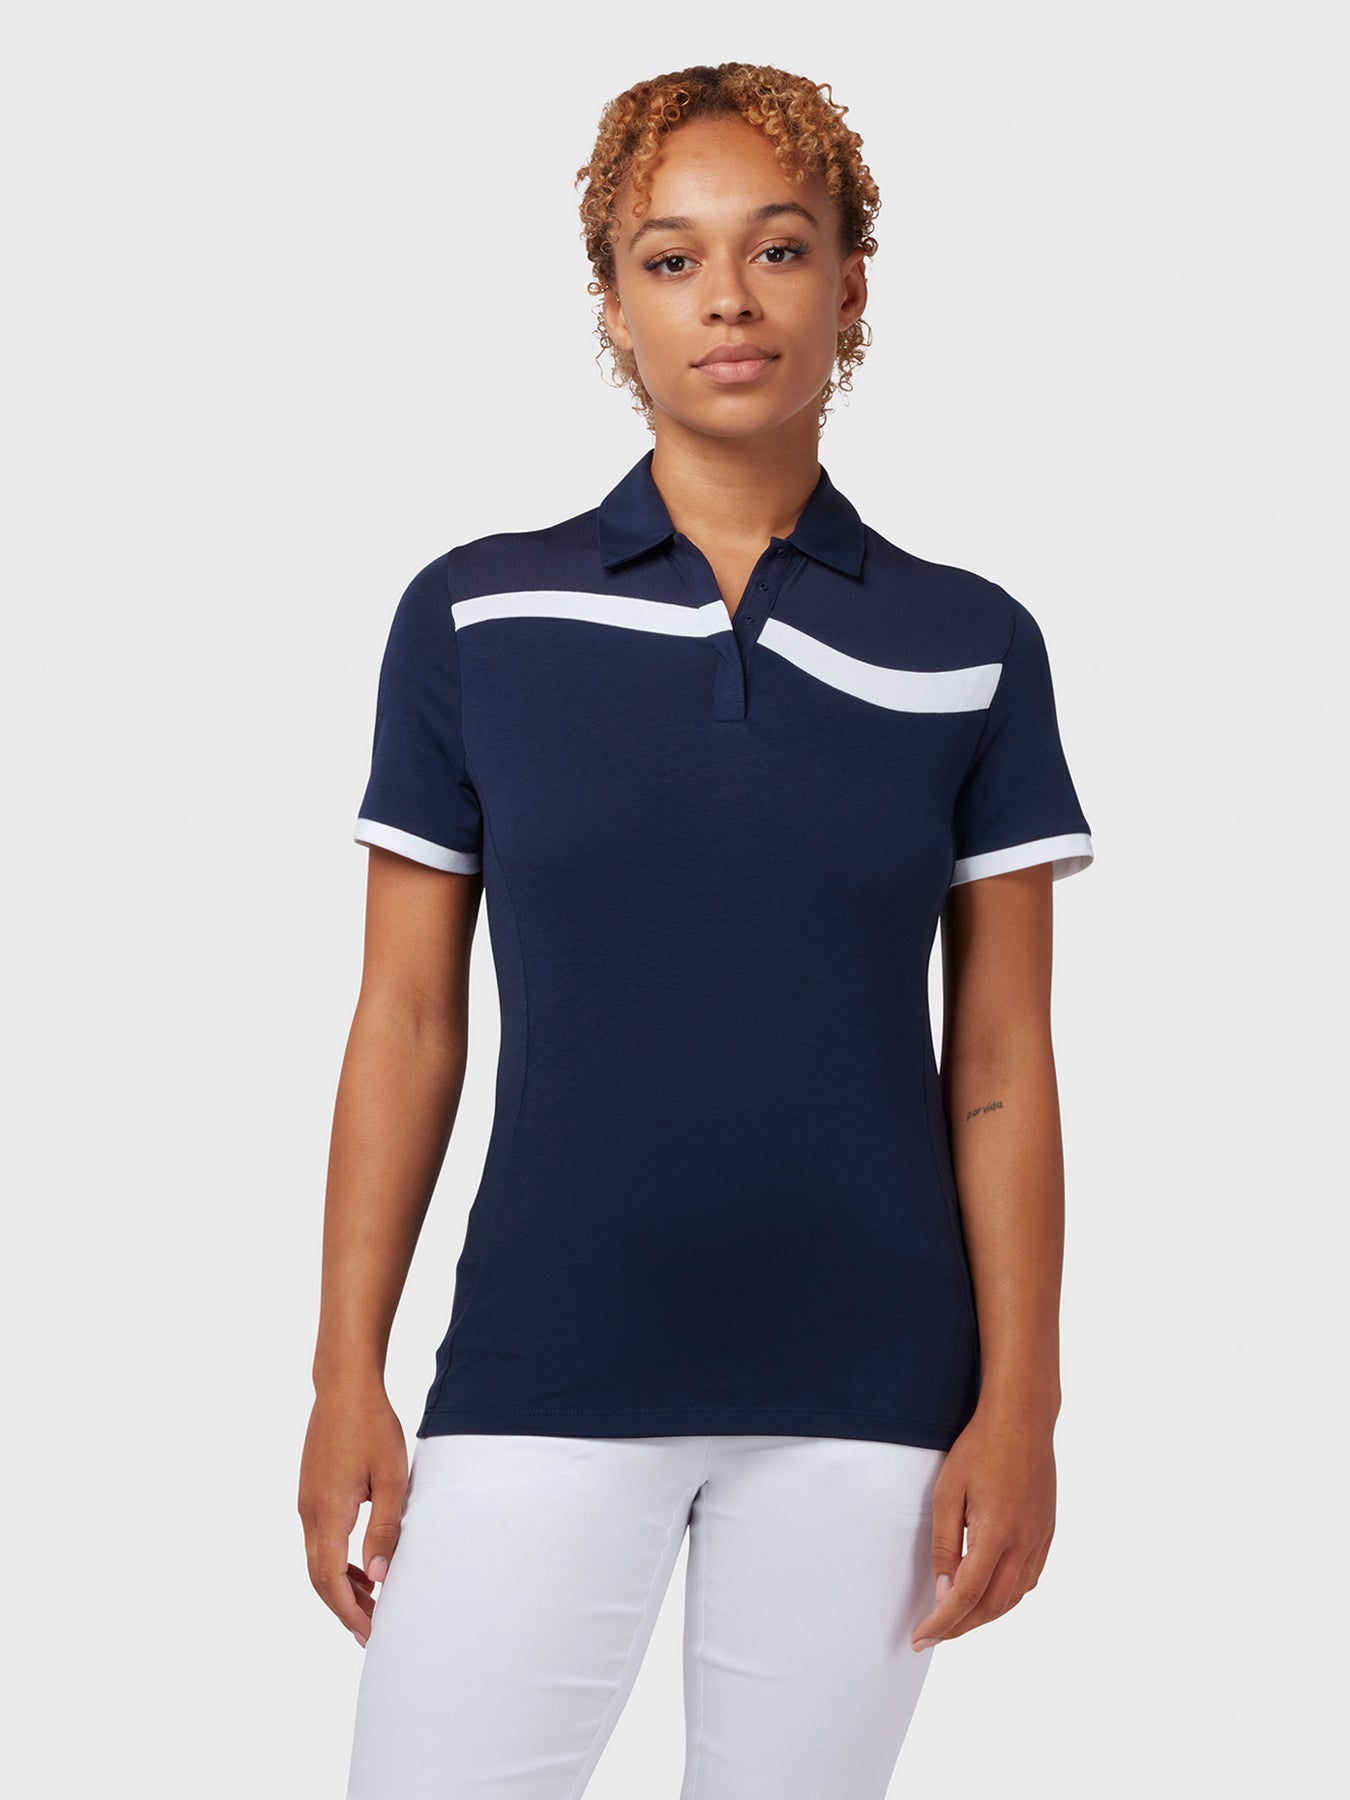 View Colour Block Womens Polo In Peacoat Peacoat XS information